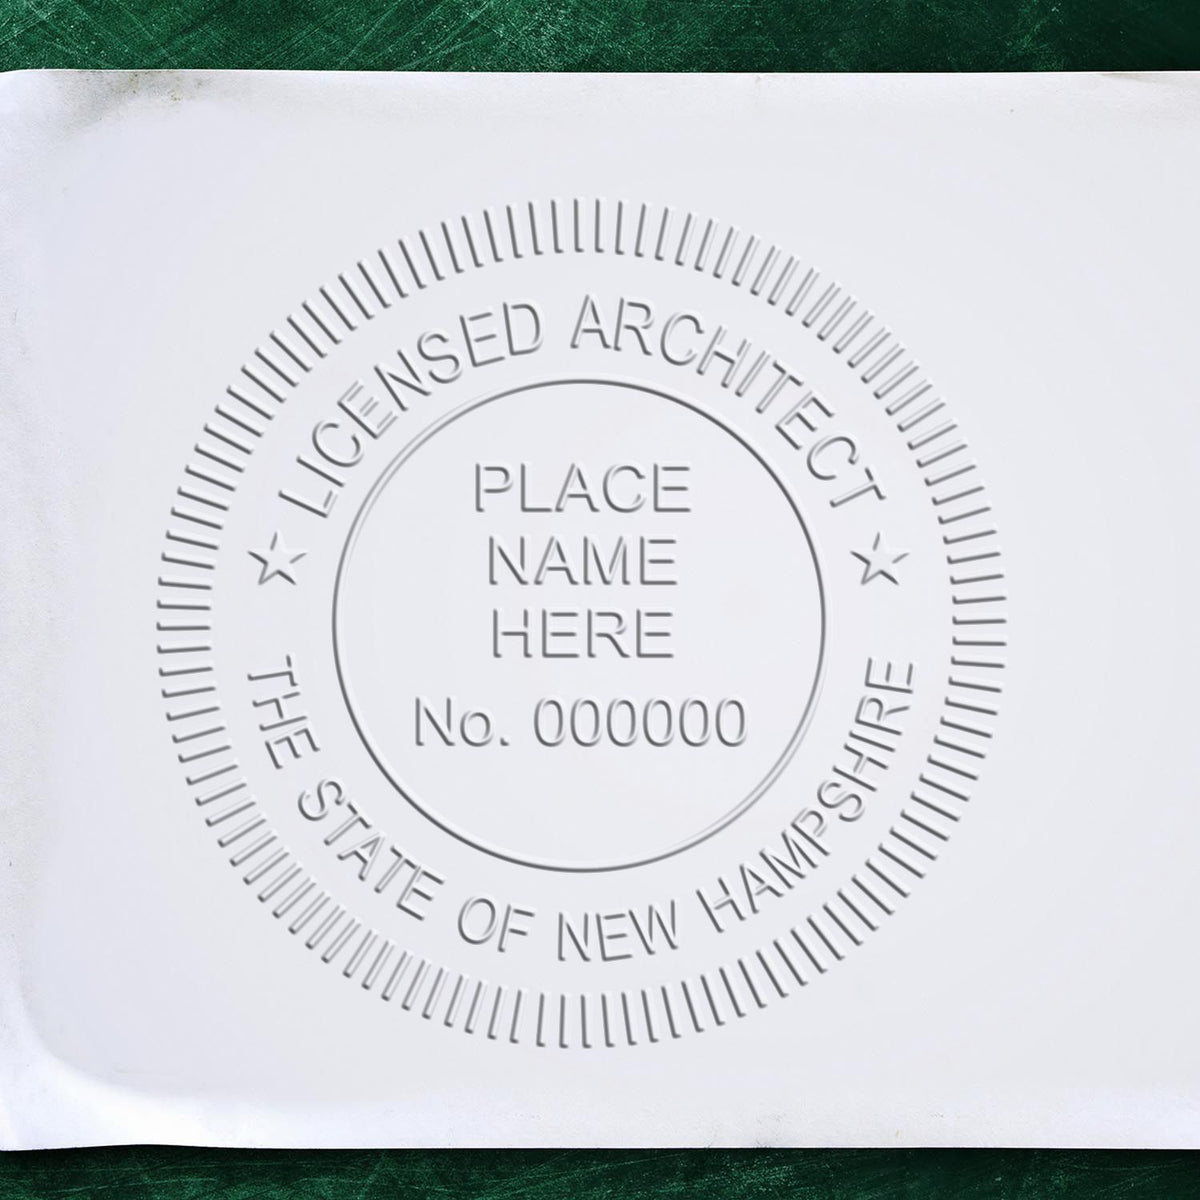 An alternative view of the State of New Hampshire Long Reach Architectural Embossing Seal stamped on a sheet of paper showing the image in use